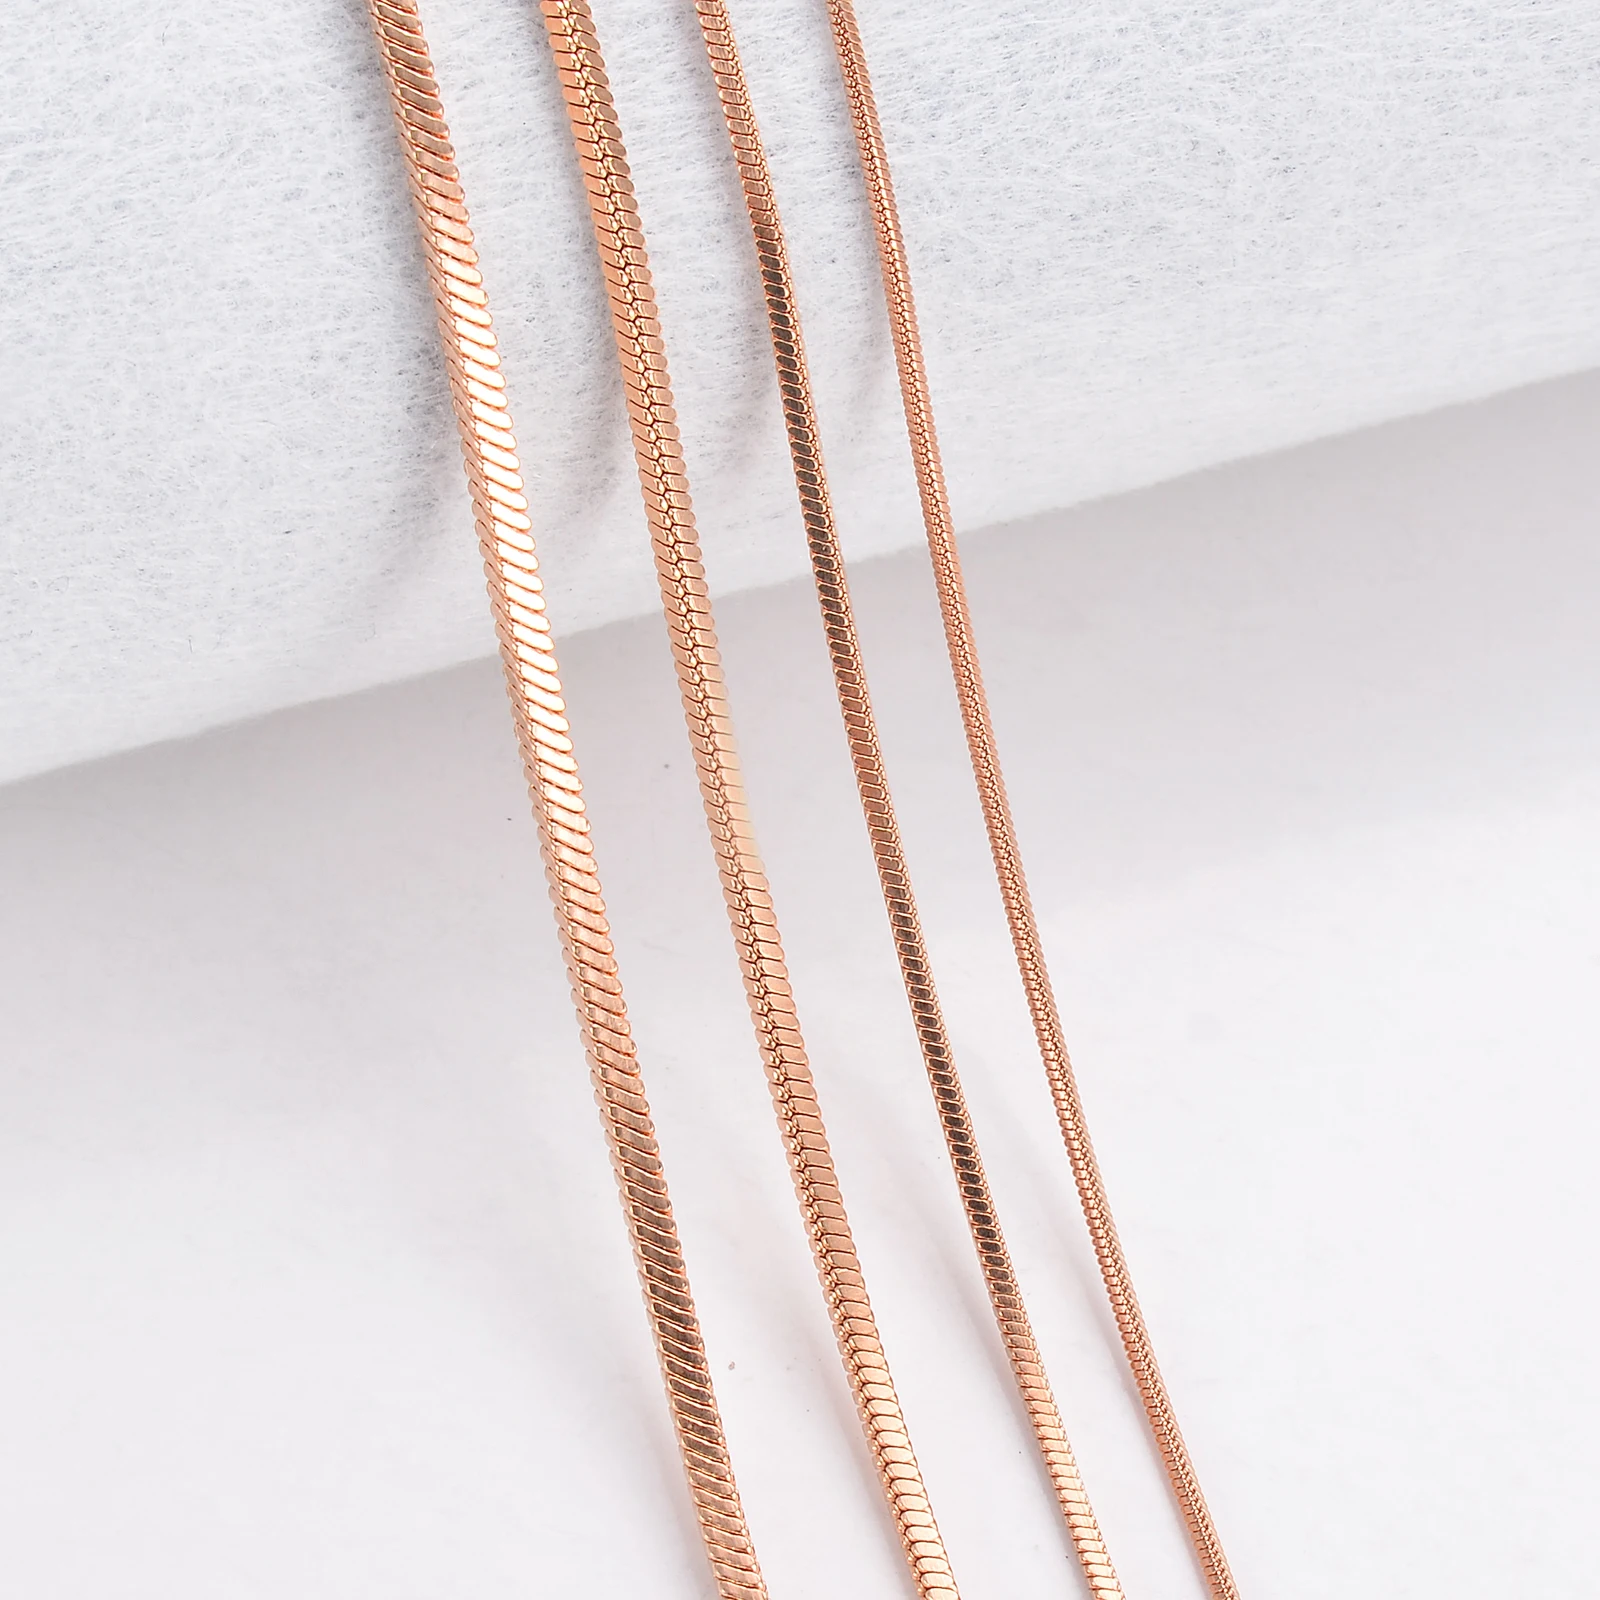 1 piece Rose Gold Color Square Snake Chain Women Necklace Jewelry 316 Stainless steel Necklace chain Width 0.9/1.2/1.5/2mm